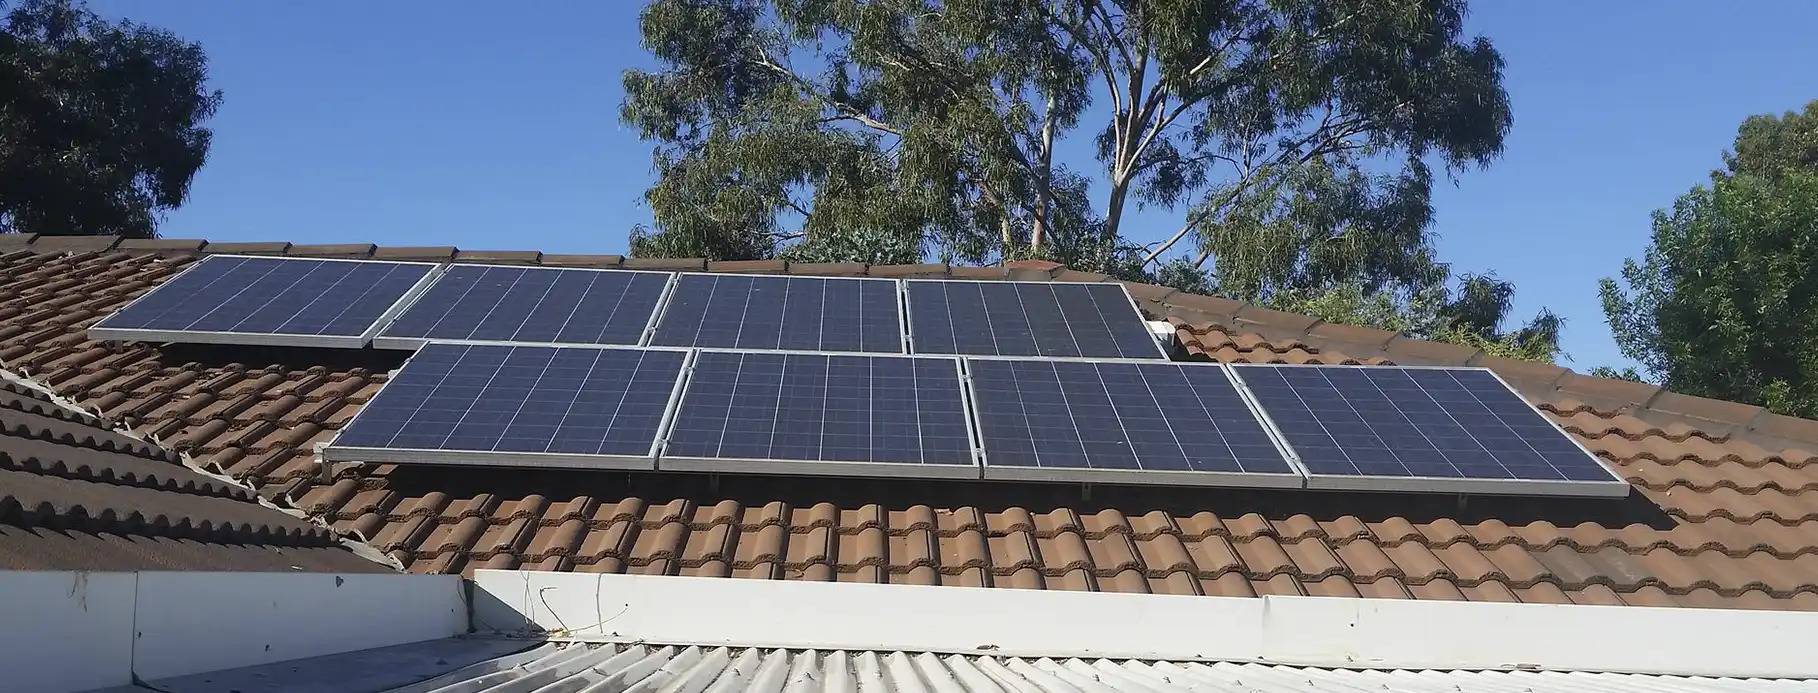  20kW Solar System- Important Things You Should Know About It